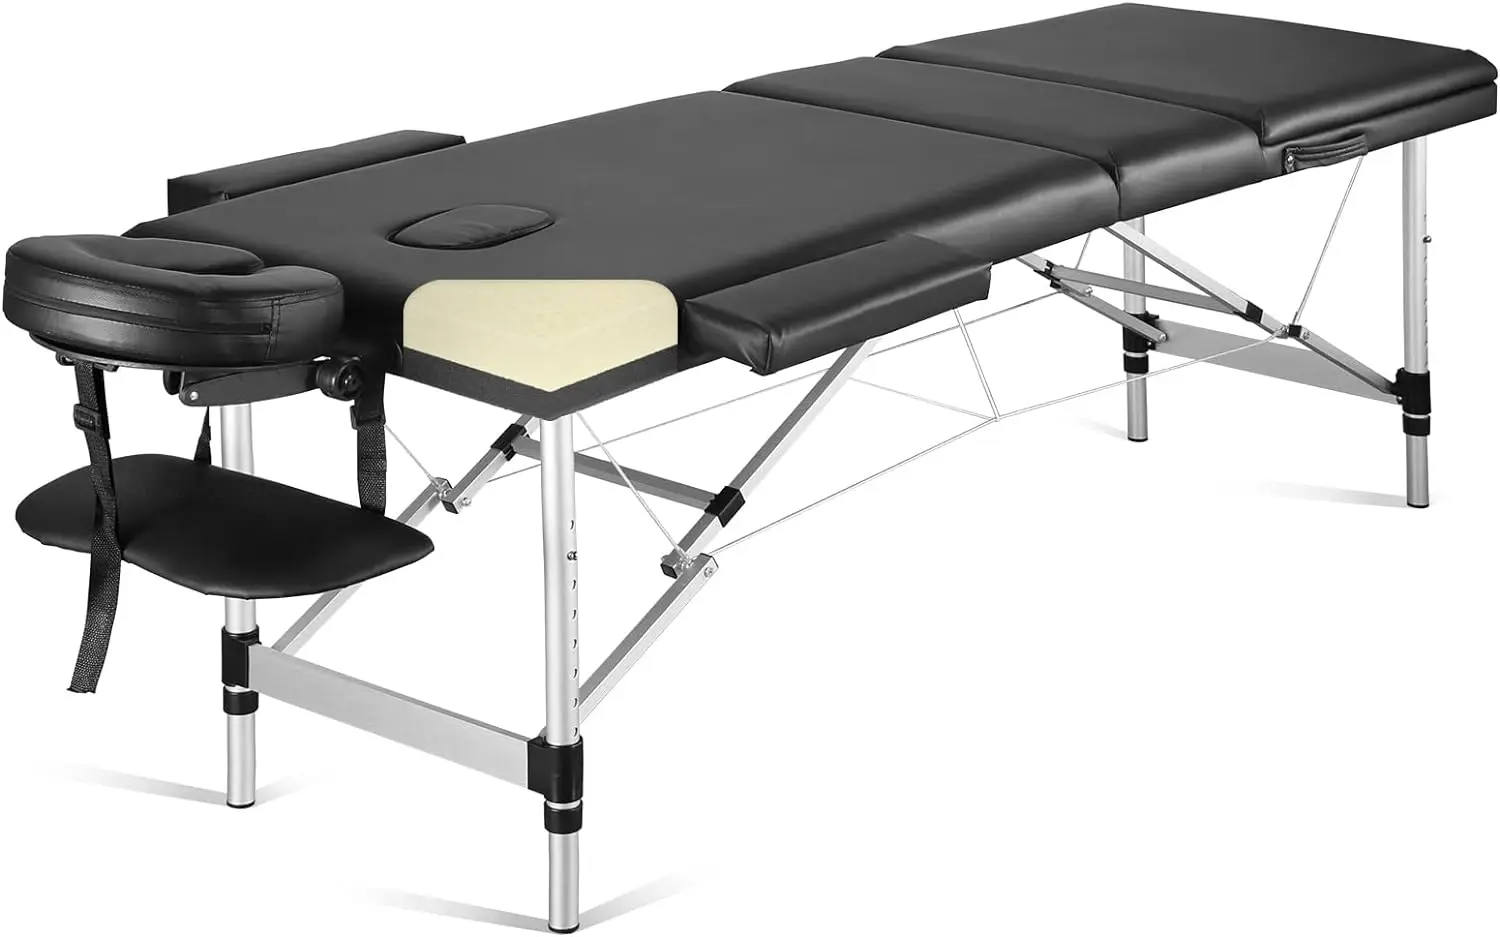 Careboda Portable Massage Table Professional Massage Bed 3 Fold 82 Inches Height Adjustable for Spa Salon Lash Tattoo with Alumi free shipping professional making umbrellas three fold umbrellas hand open parasol sunshade supermini universal for gents